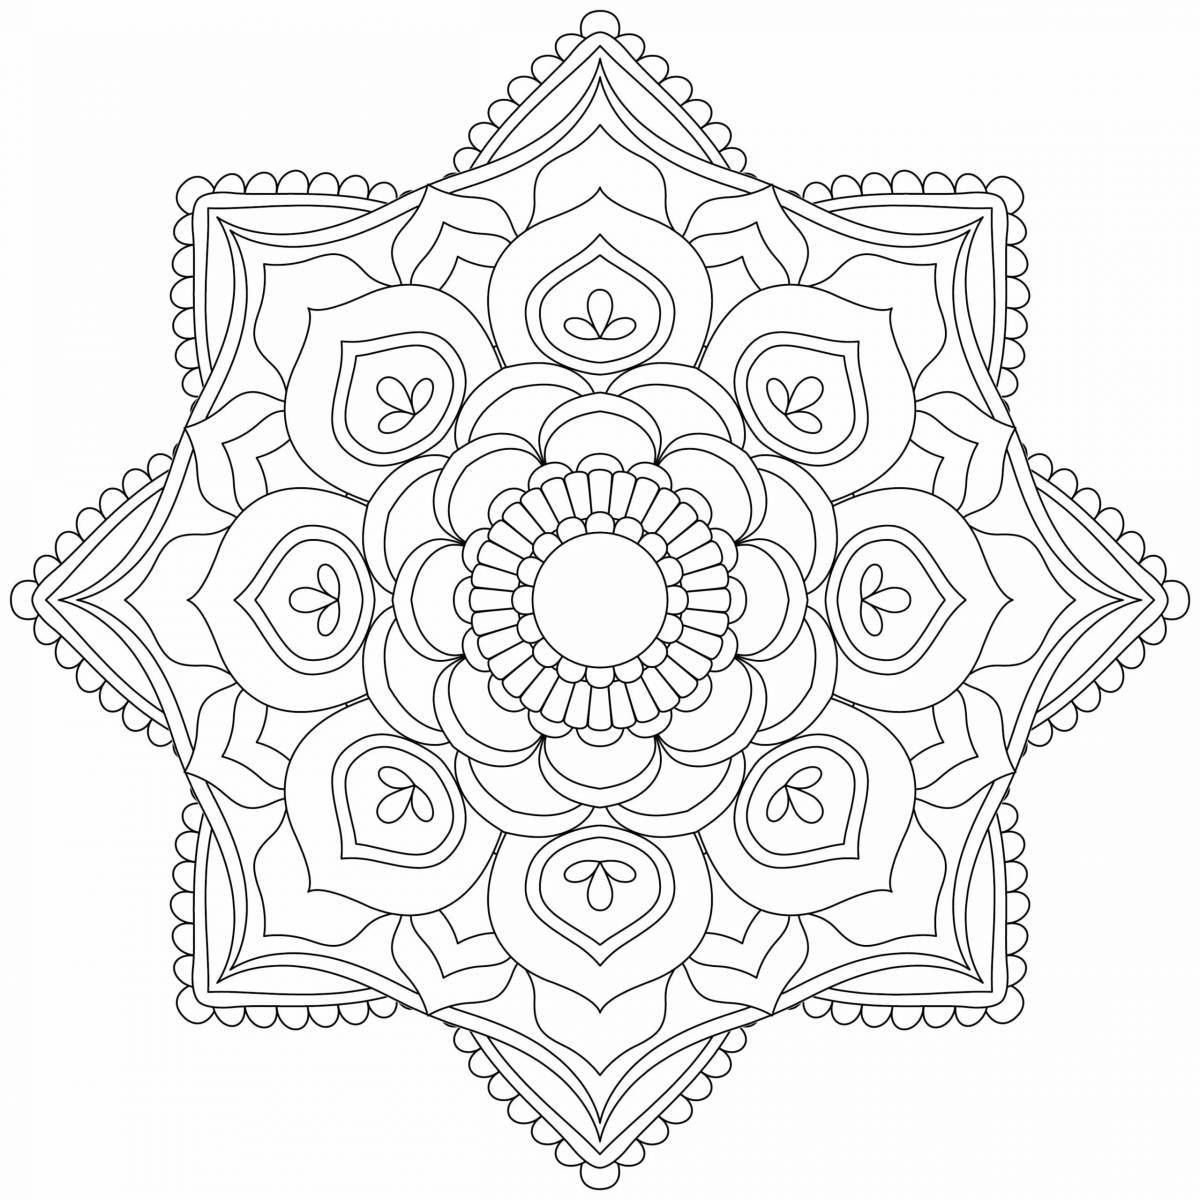 Blissful coloring book for peace of mind